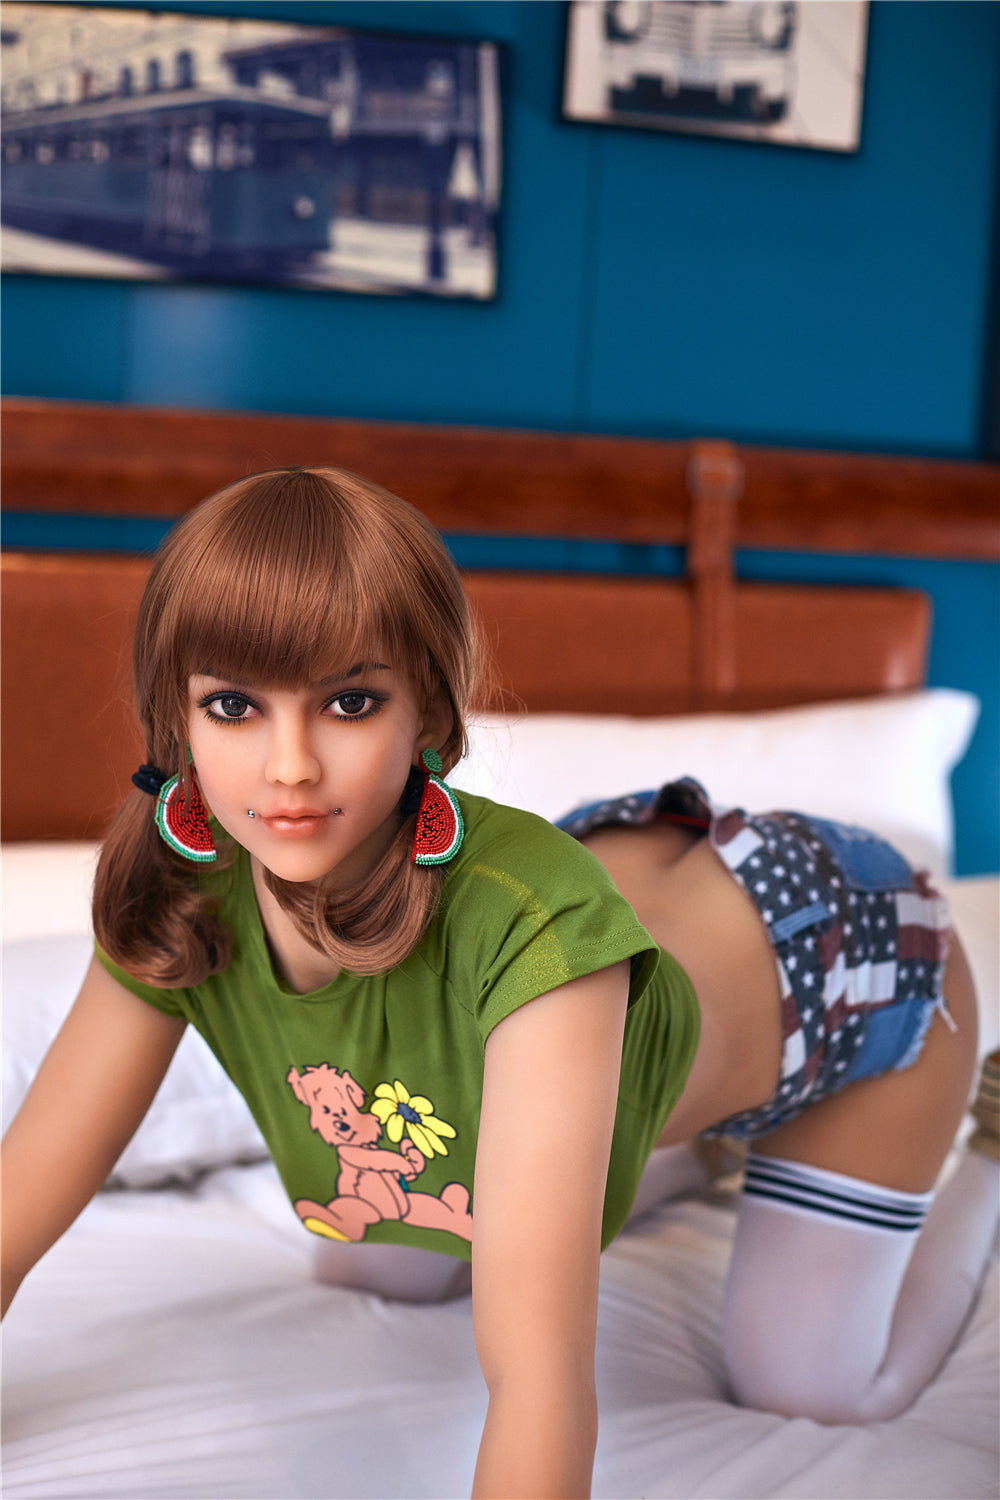 Irontech Doll 159 cm E TPE - Angelina | Buy Sex Dolls at DOLLS ACTUALLY